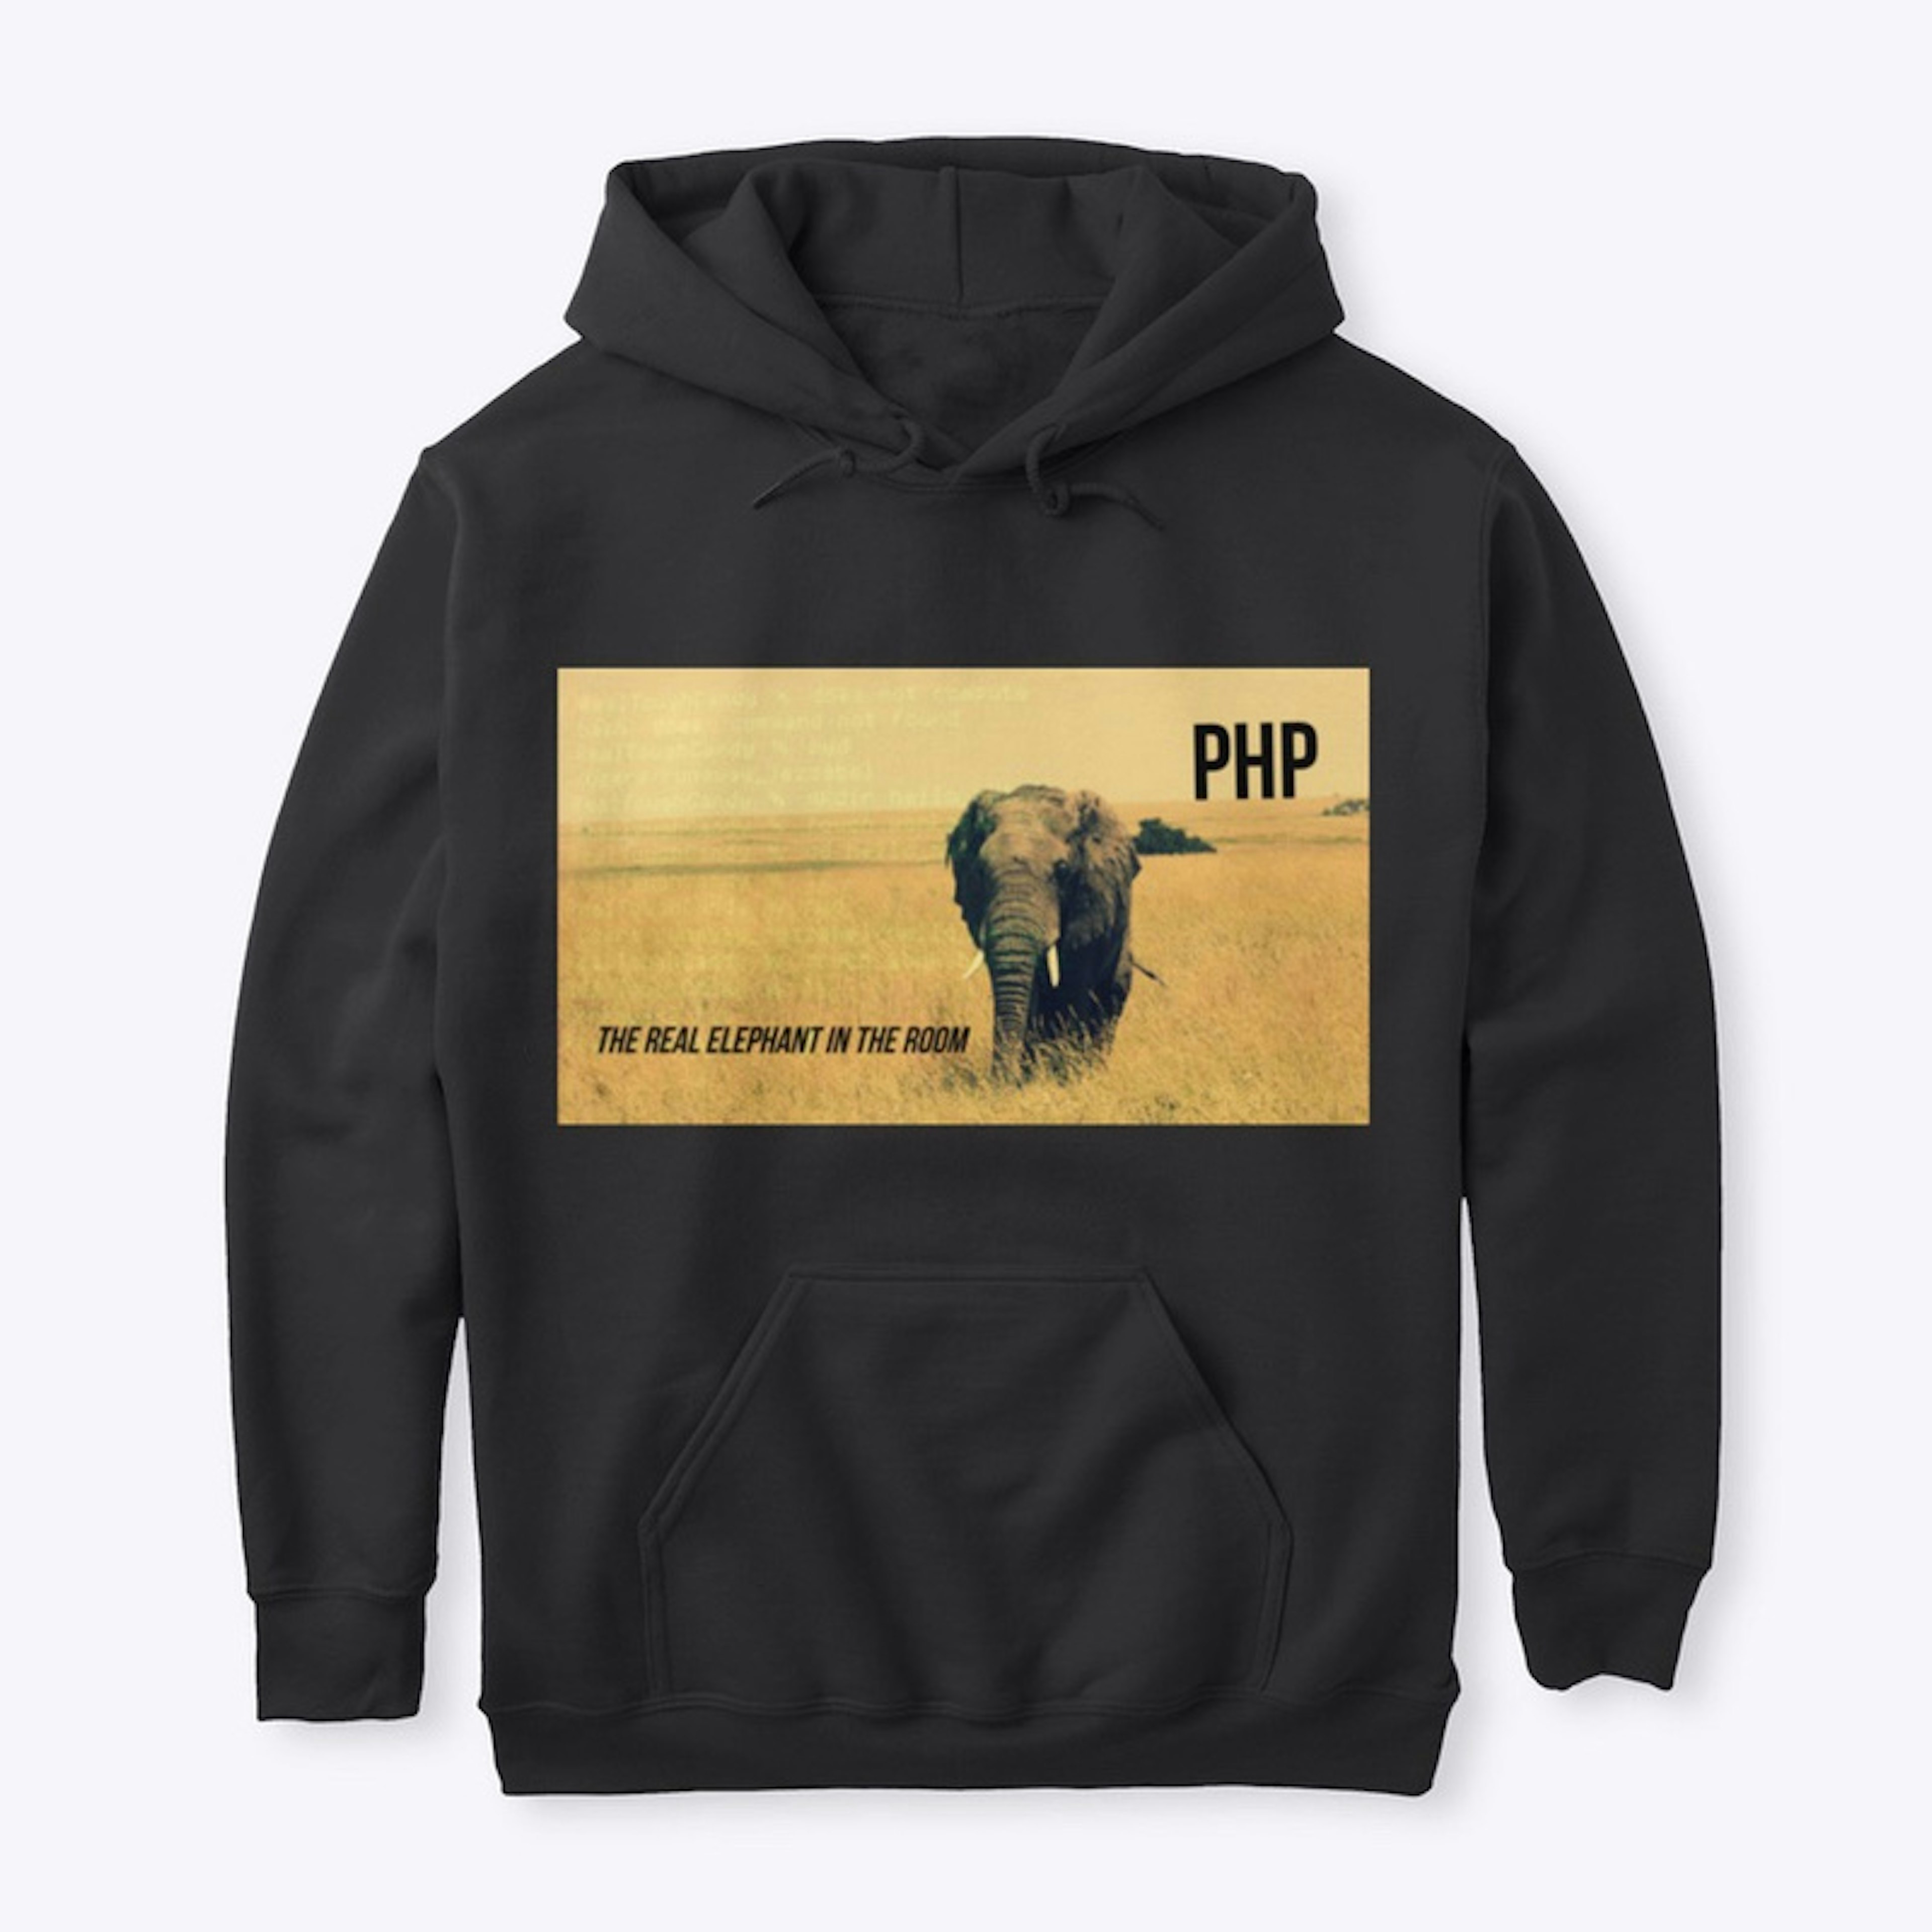 PHP: The real elephant in the room